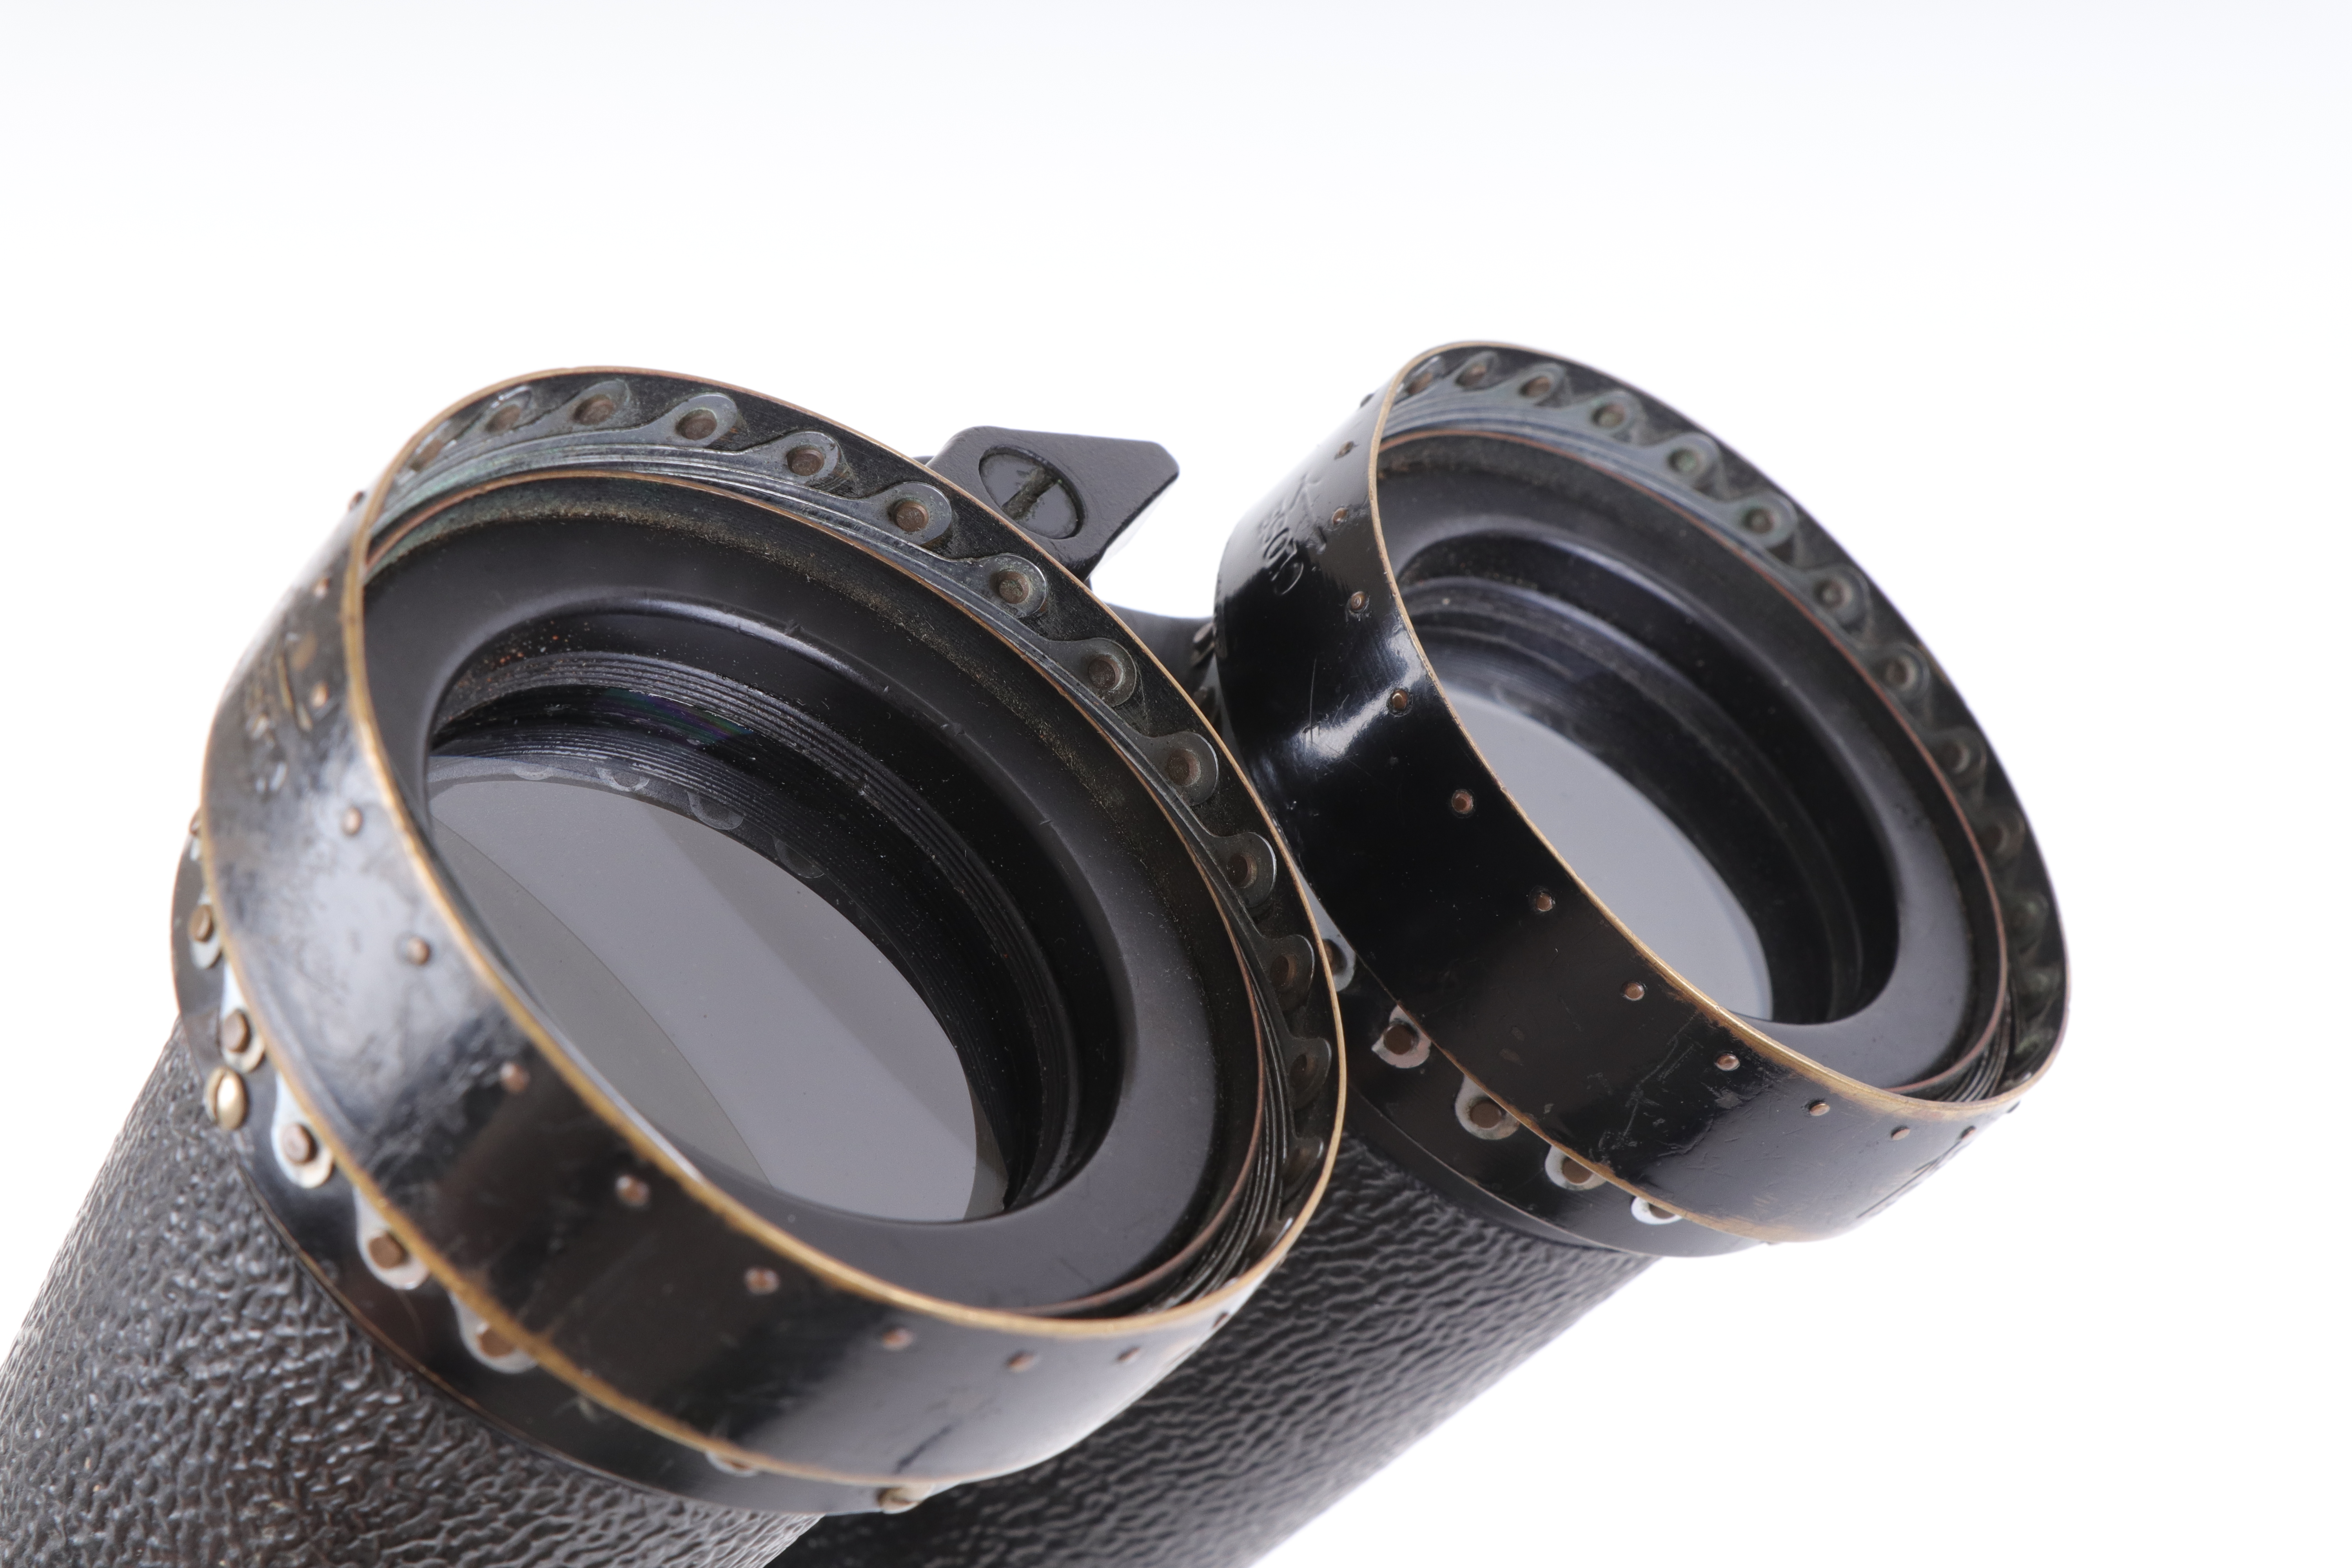 WWII Barr & Stroud C.F.41 7x military binoculars, broad arrow marks, with expanding weather shields - Image 5 of 14